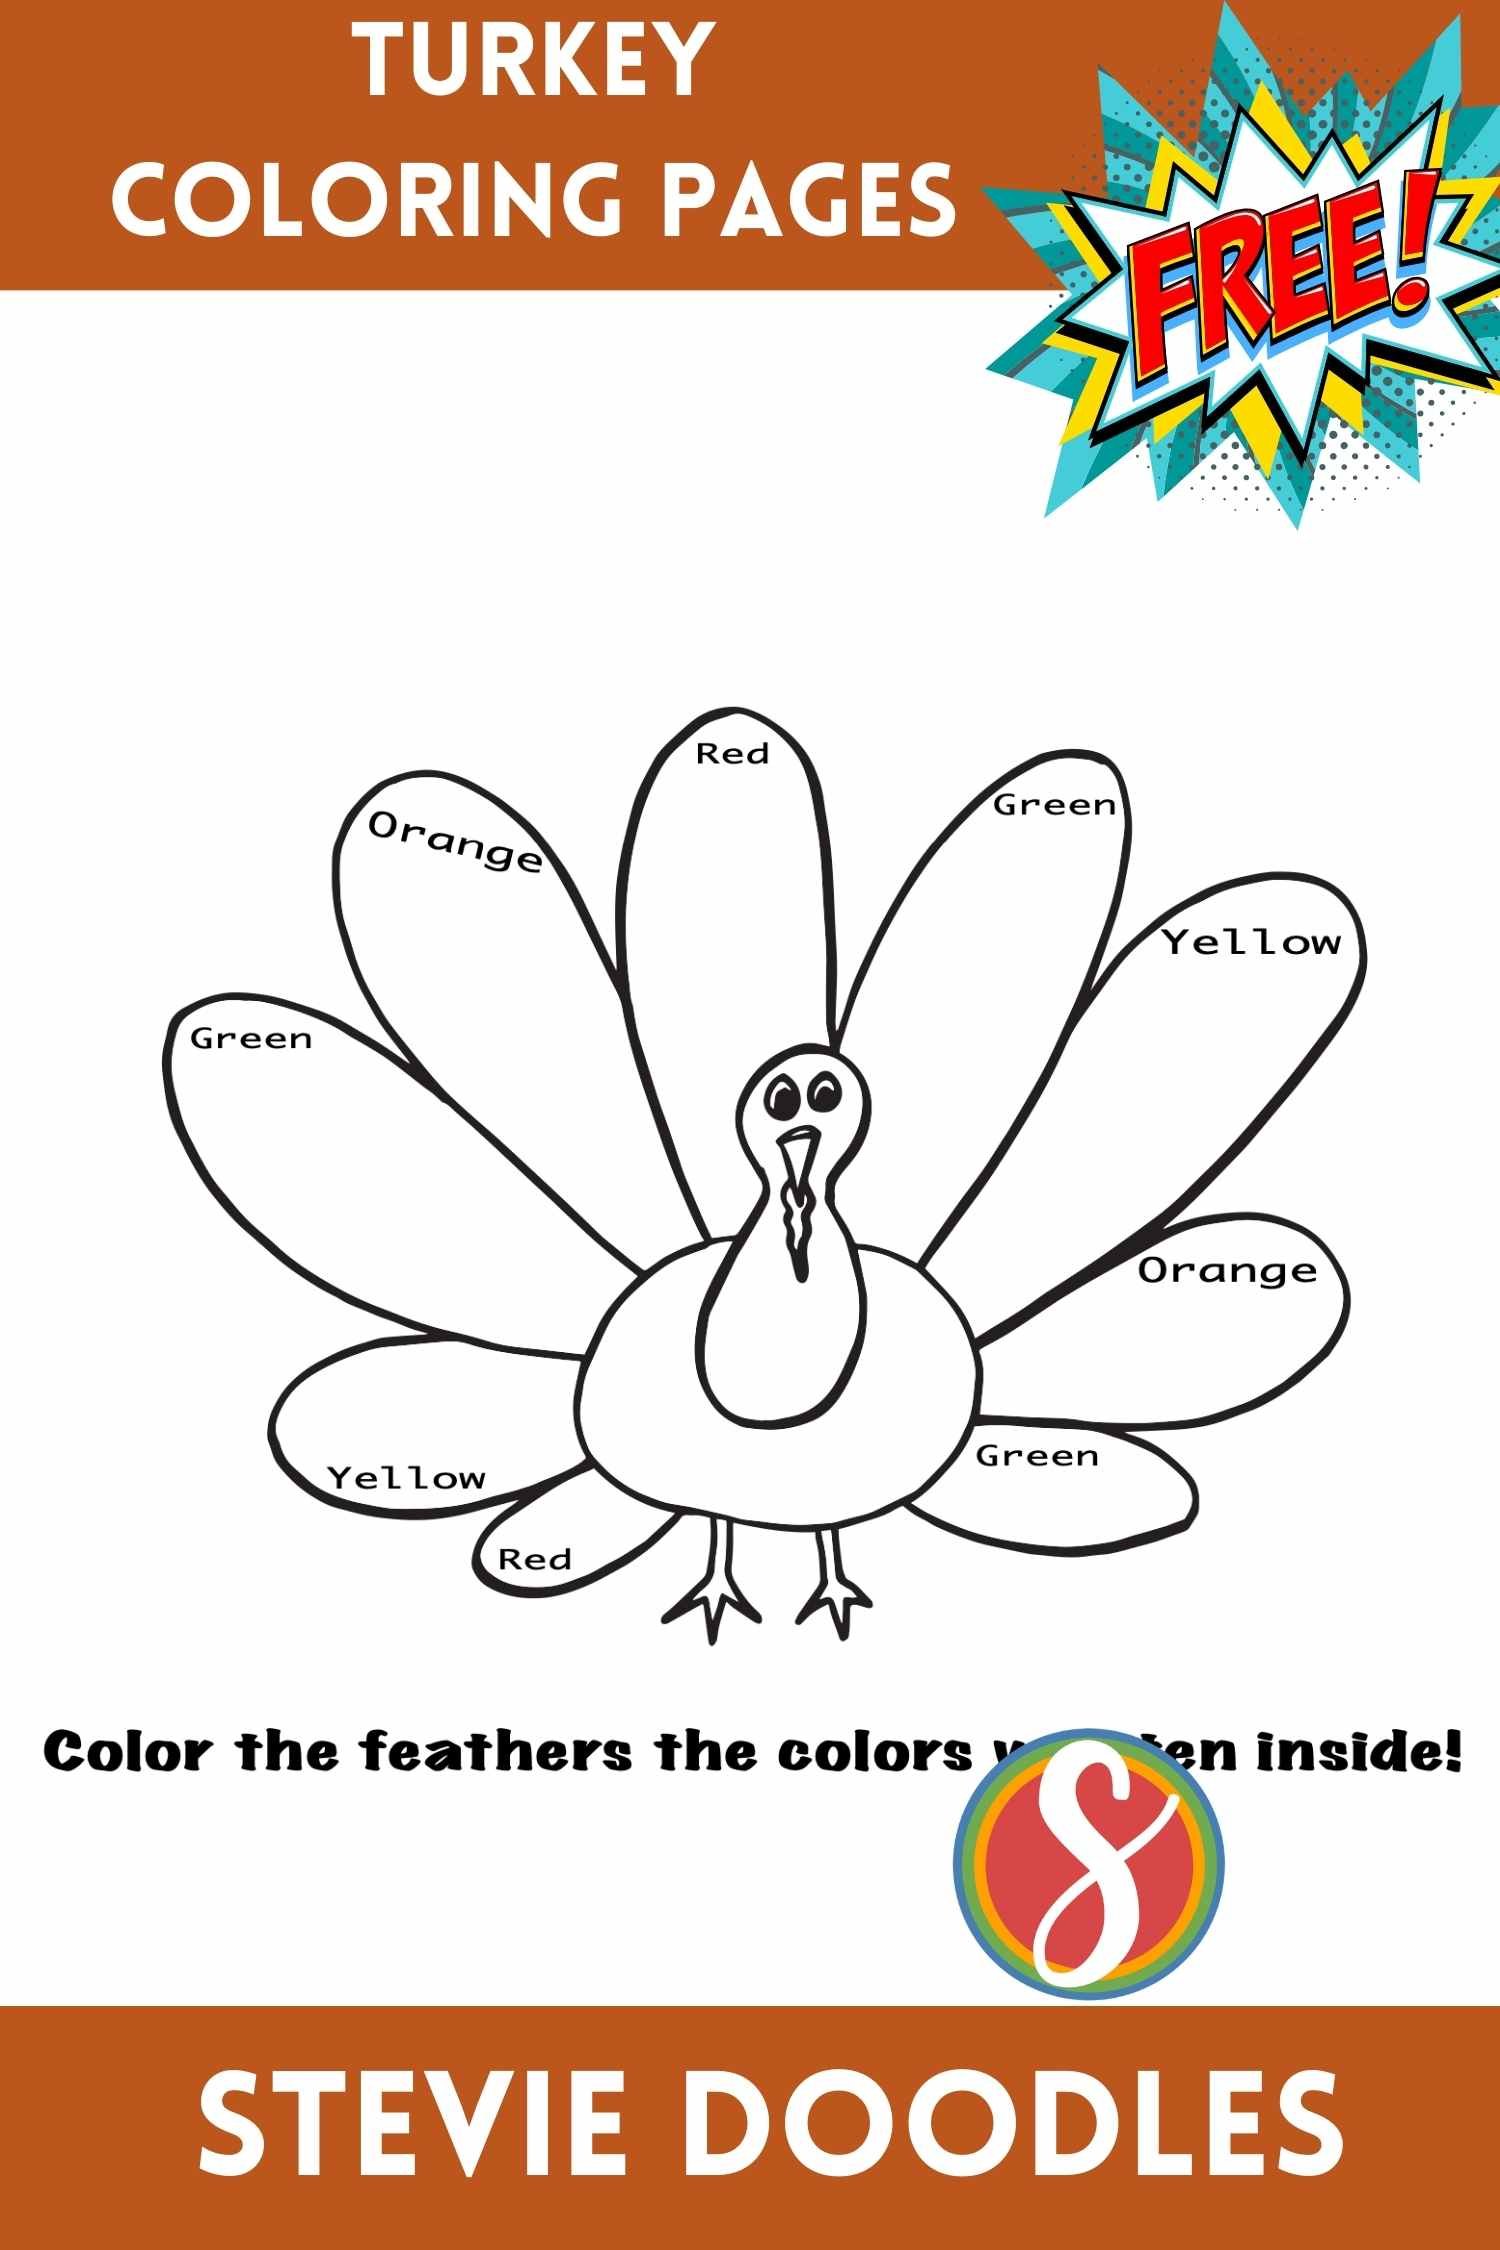 simple turkey drawing with colors inside each feather to color